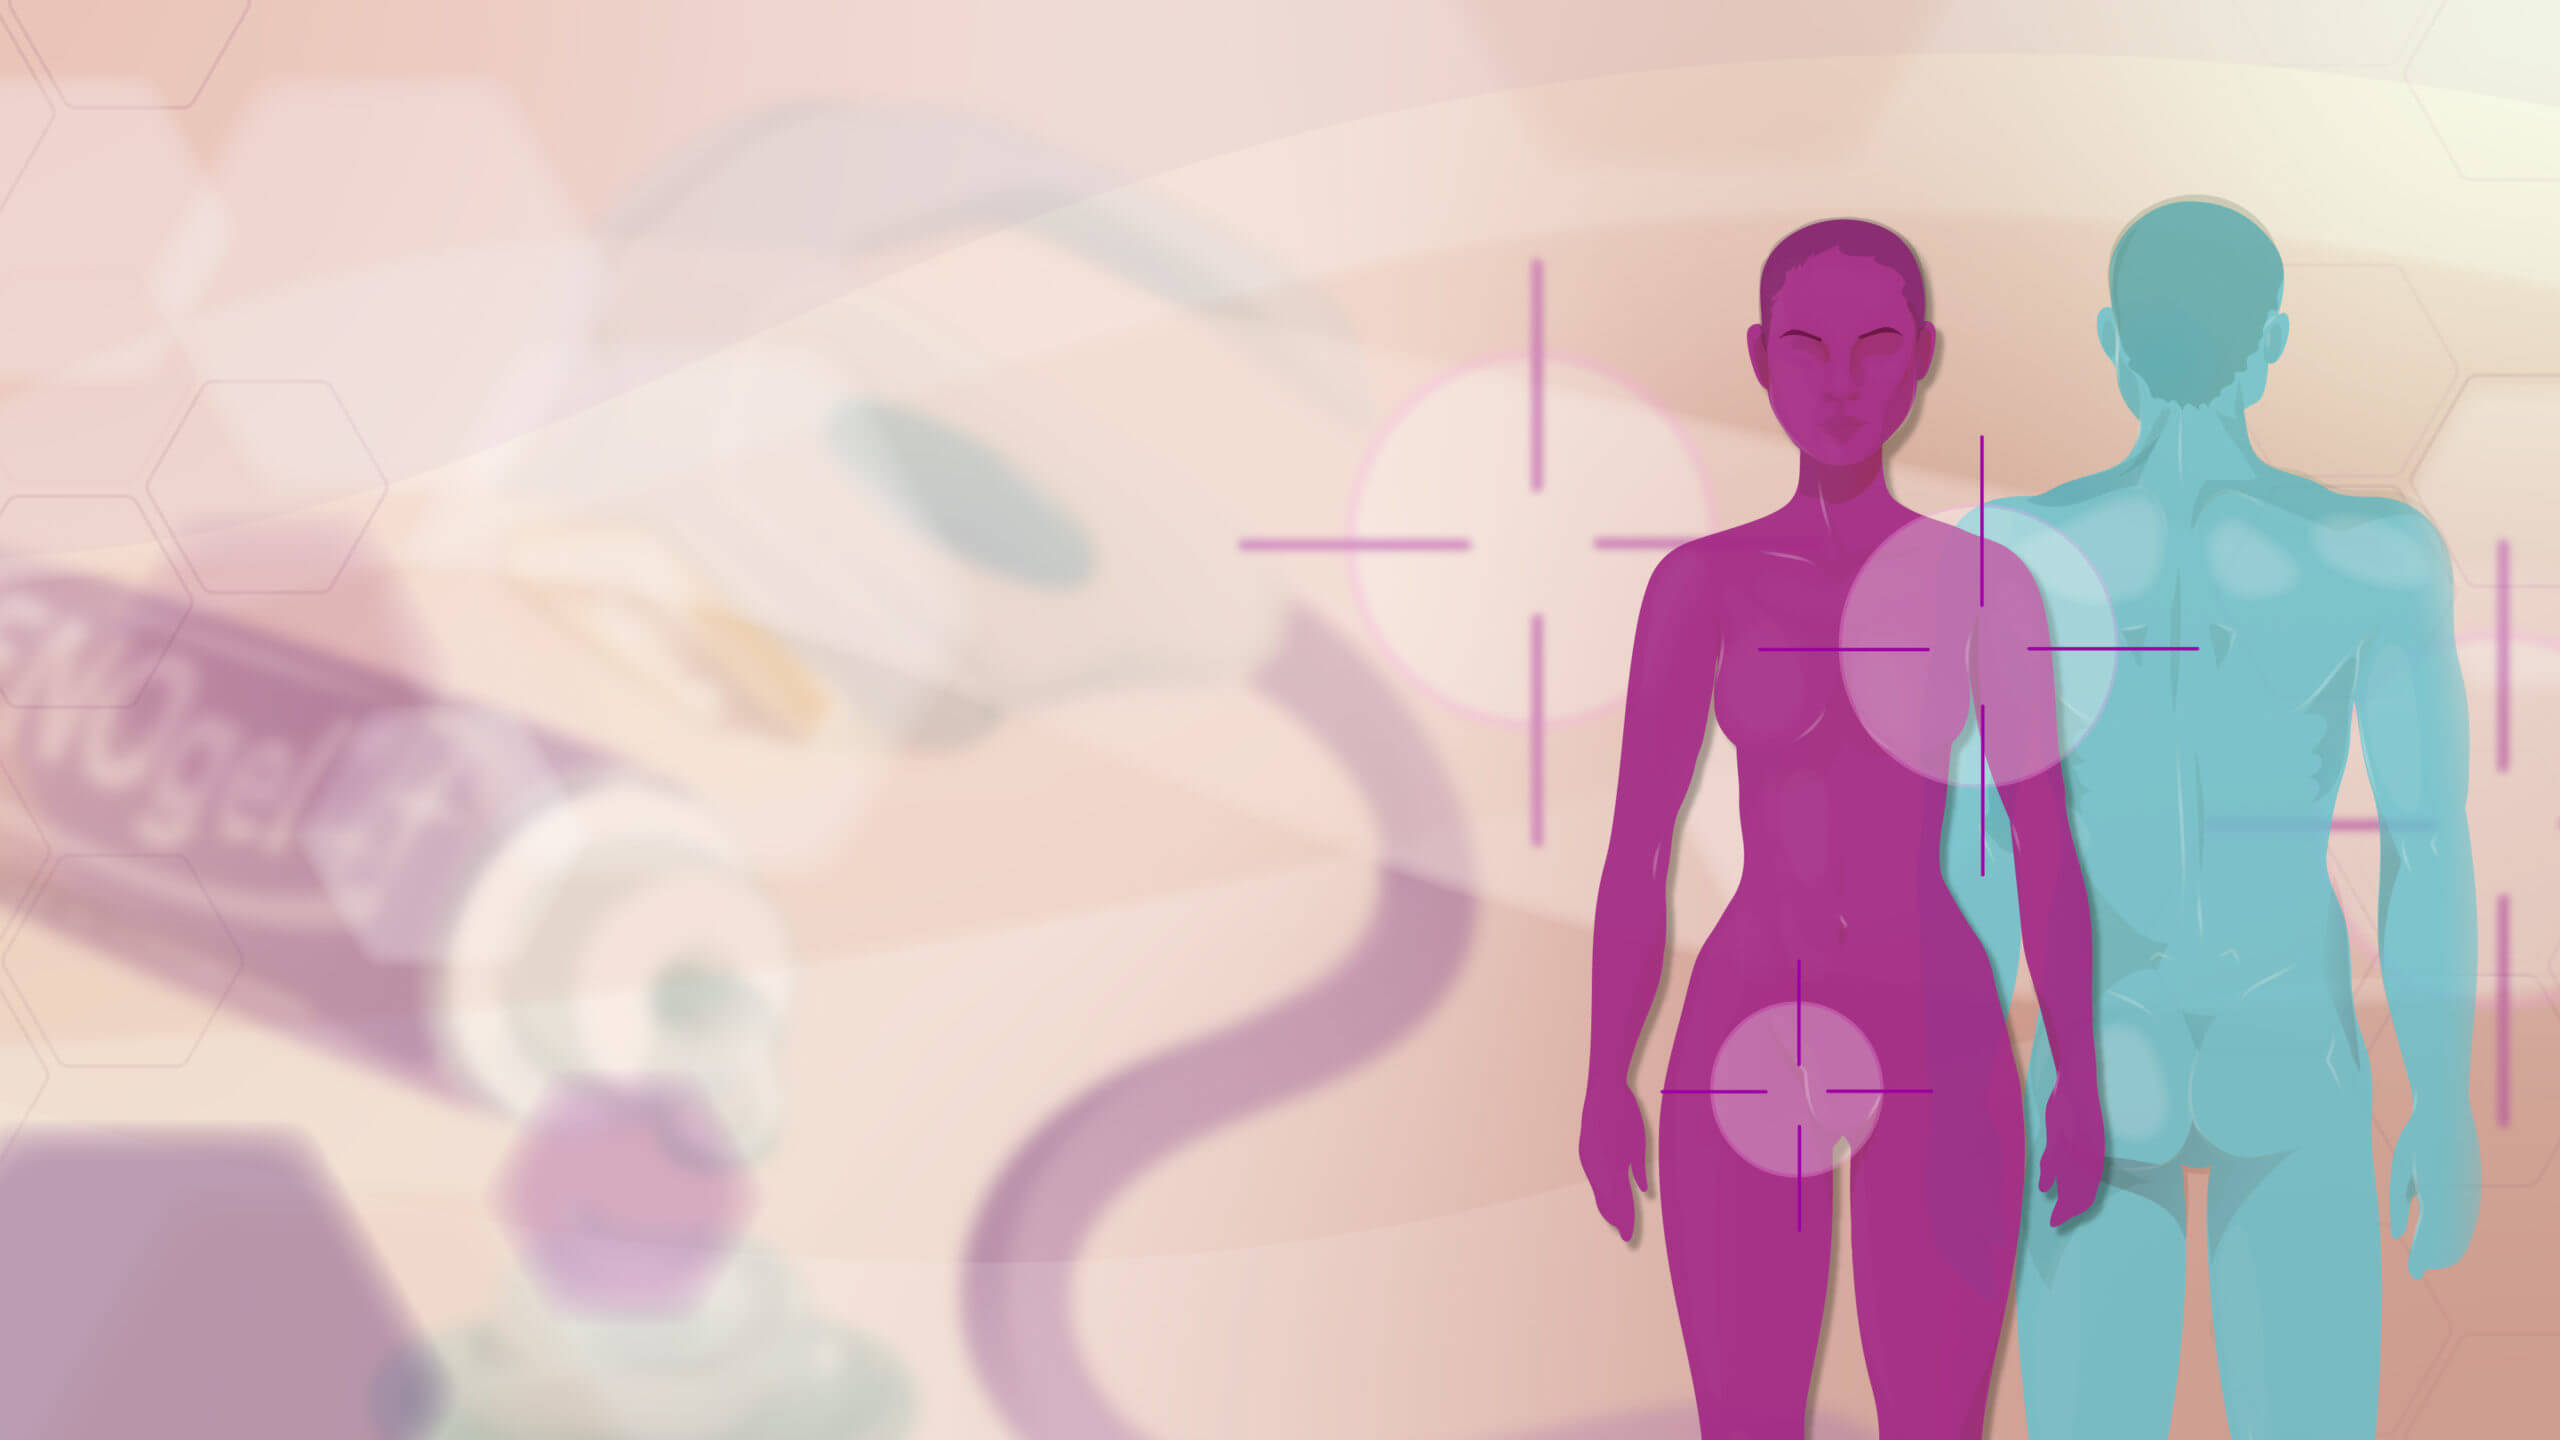 Background image Body regions male and woman